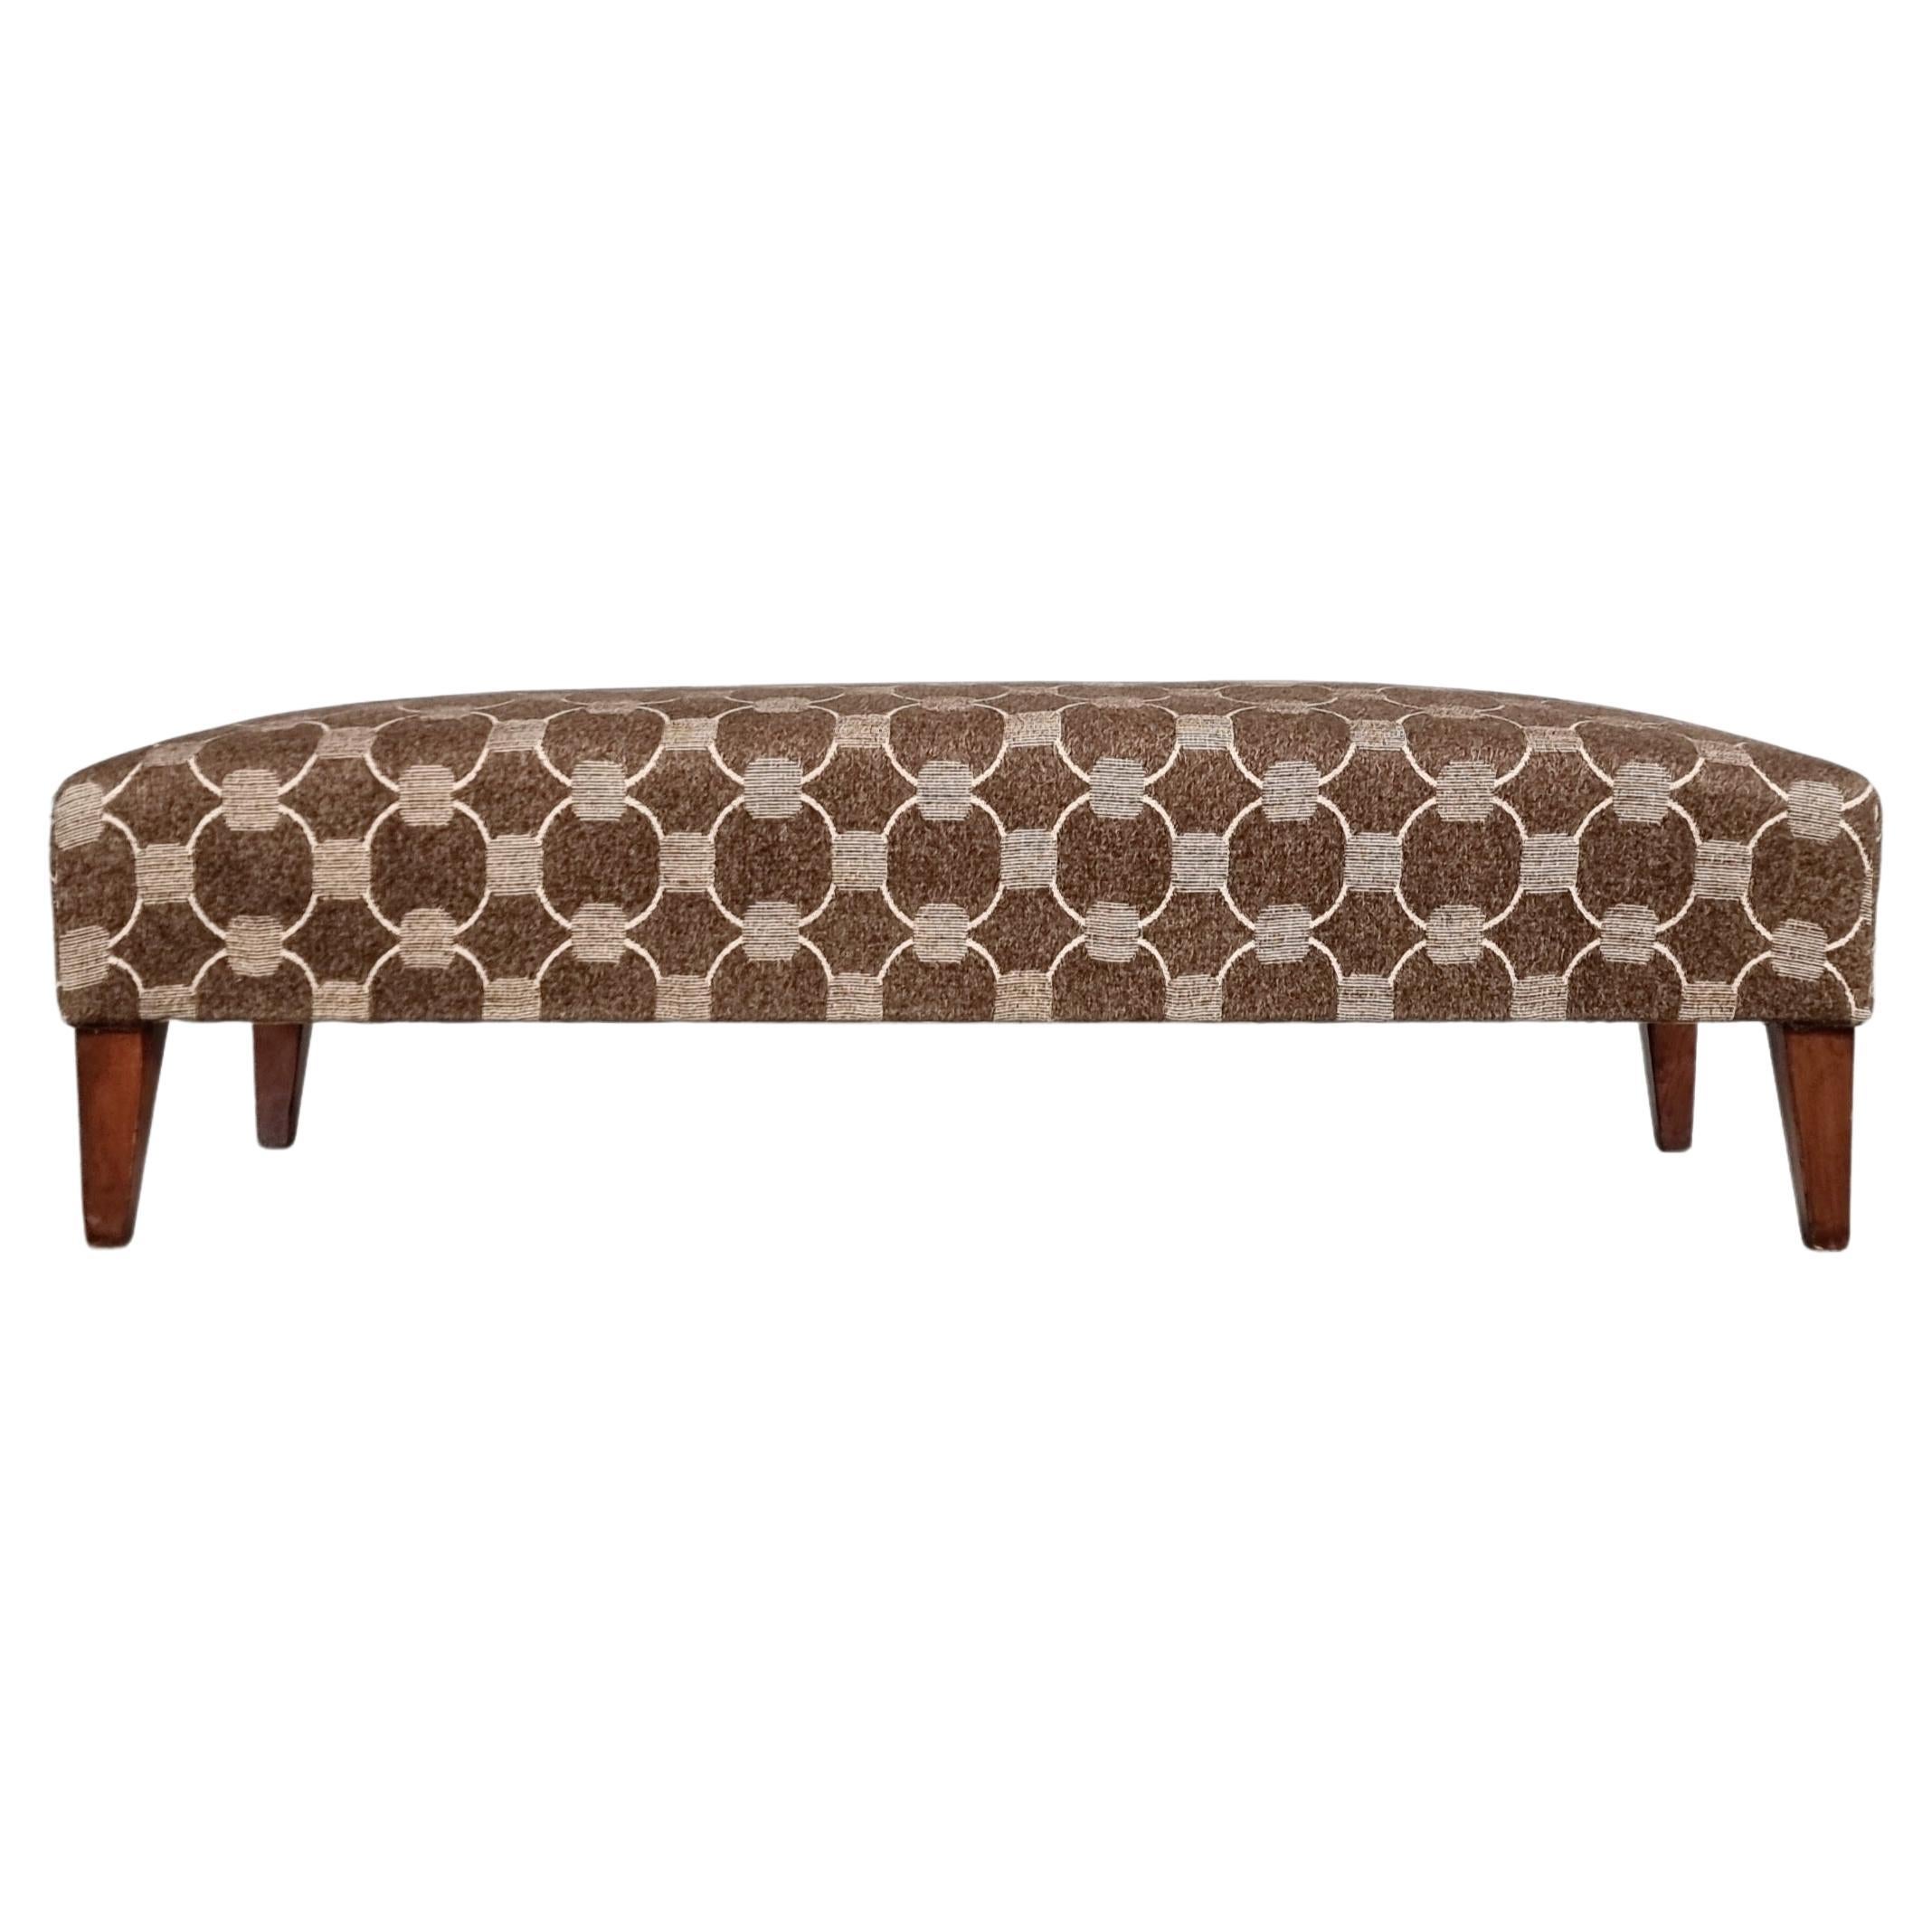 Bench in the manner of Gio Ponti in wood and fabric, 1950s